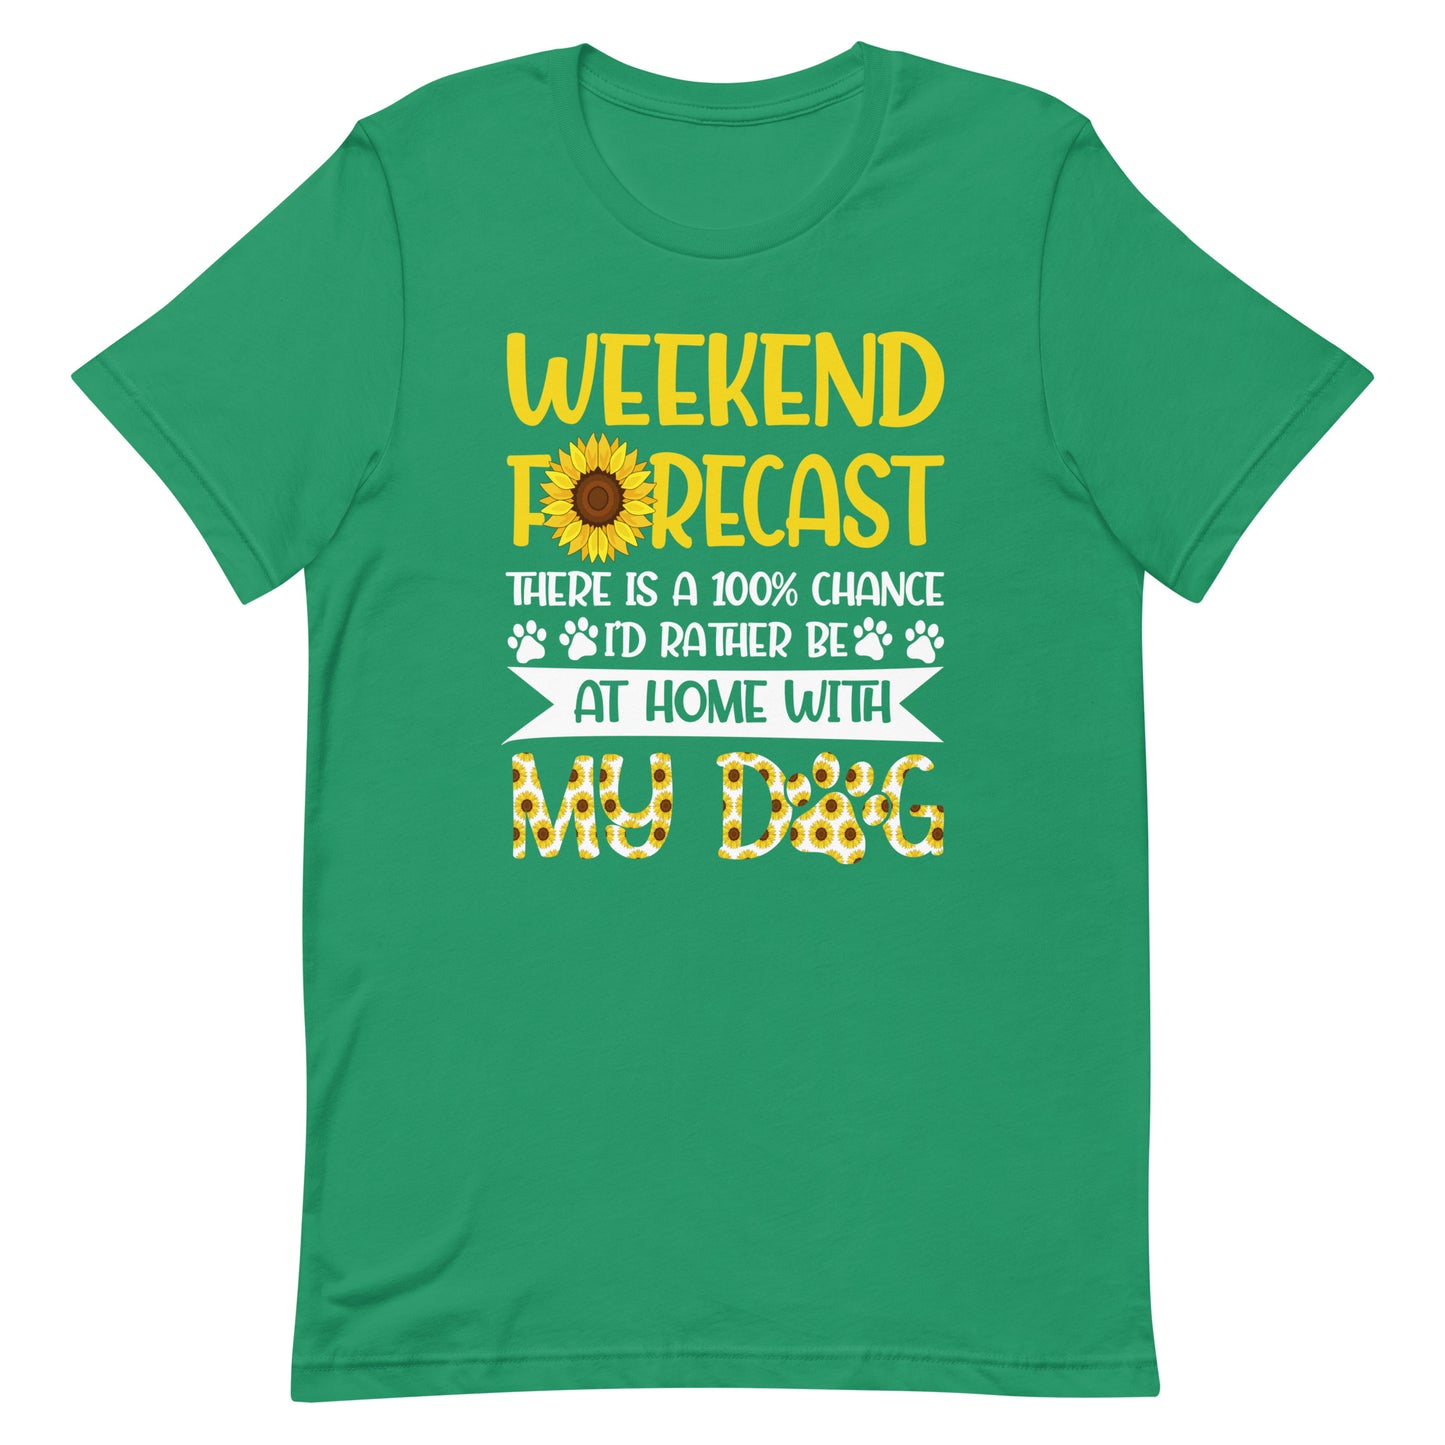 Weekend Forecast at Home With My Dog T-Shirt